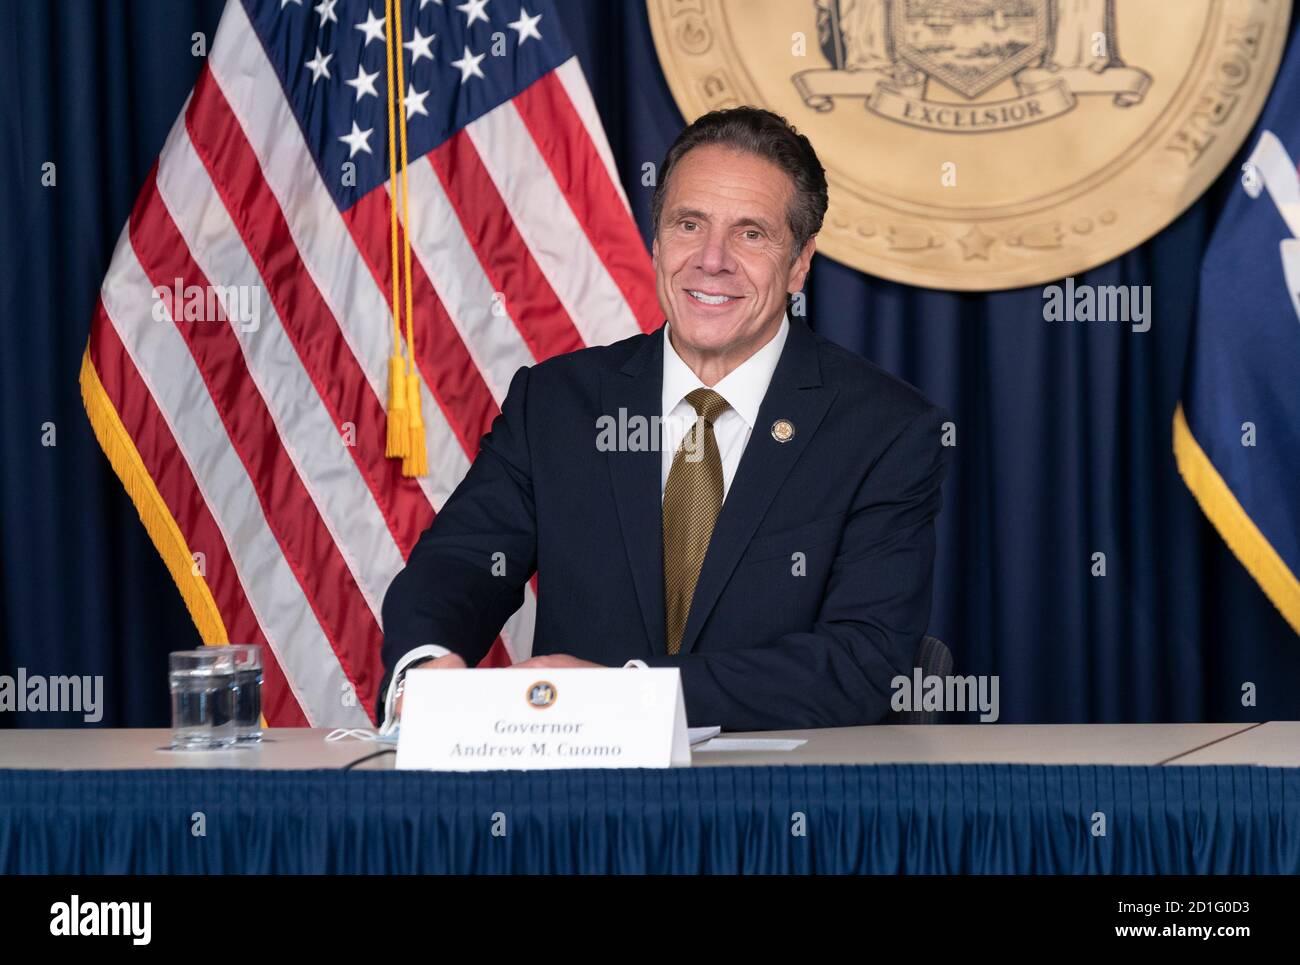 New York, NY - October 5, 2020: NYS Governor Andrew Cuomo makes daily media announcement and briefing at 633 3rd Avenue, Manhattan Stock Photo